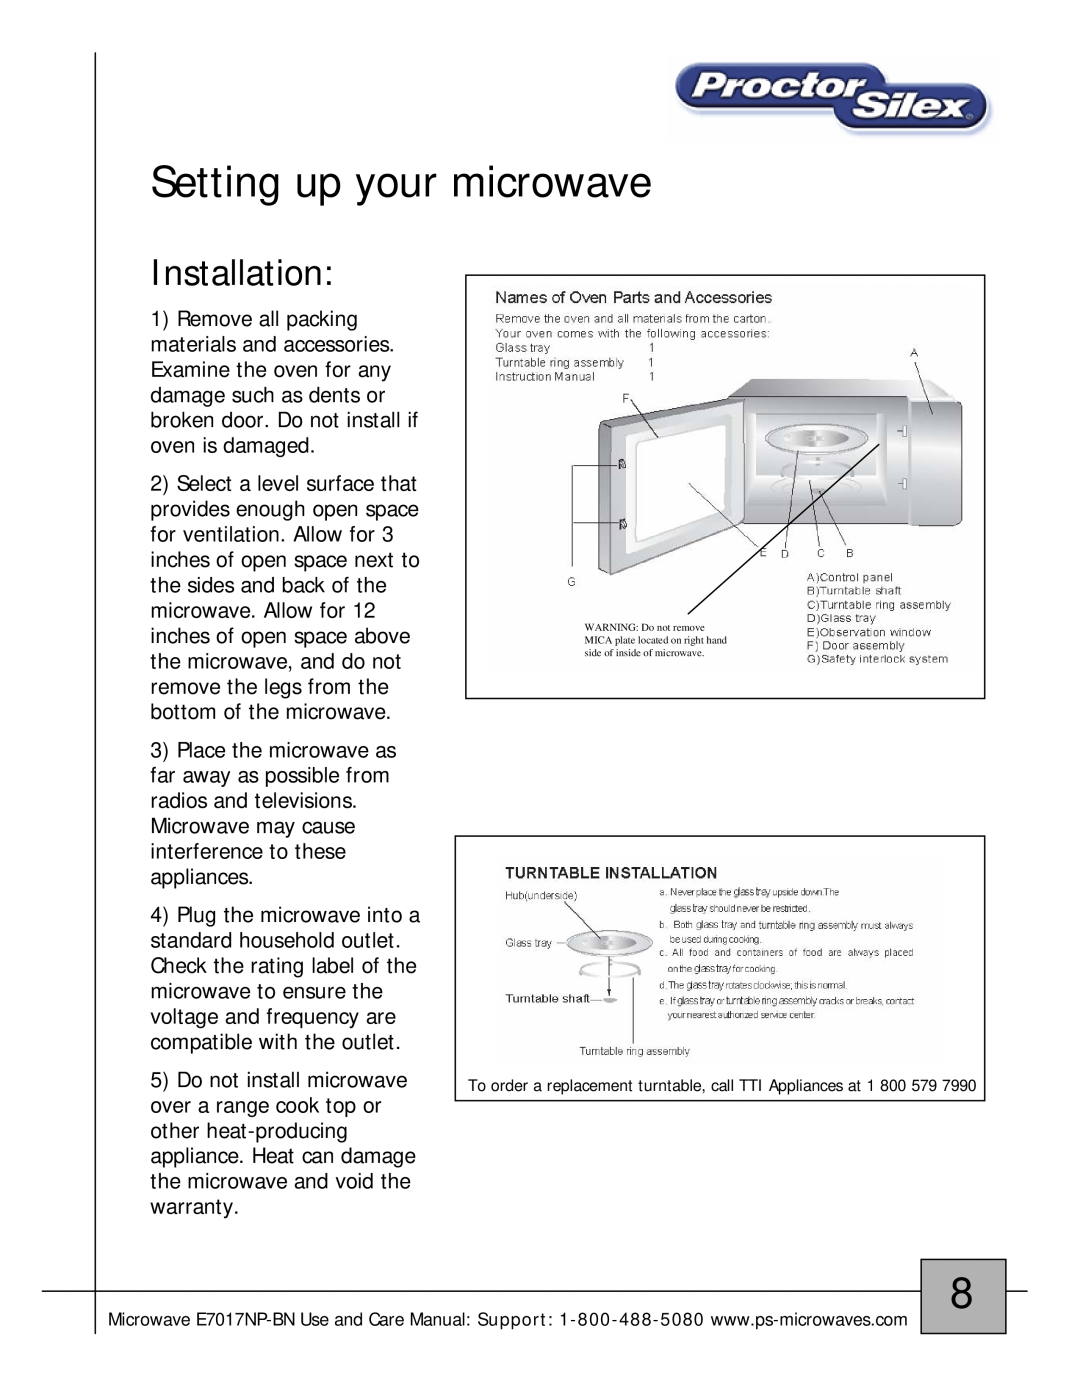 Proctor-Silex E7017NP-BN owner manual Setting up your microwave, Installation 